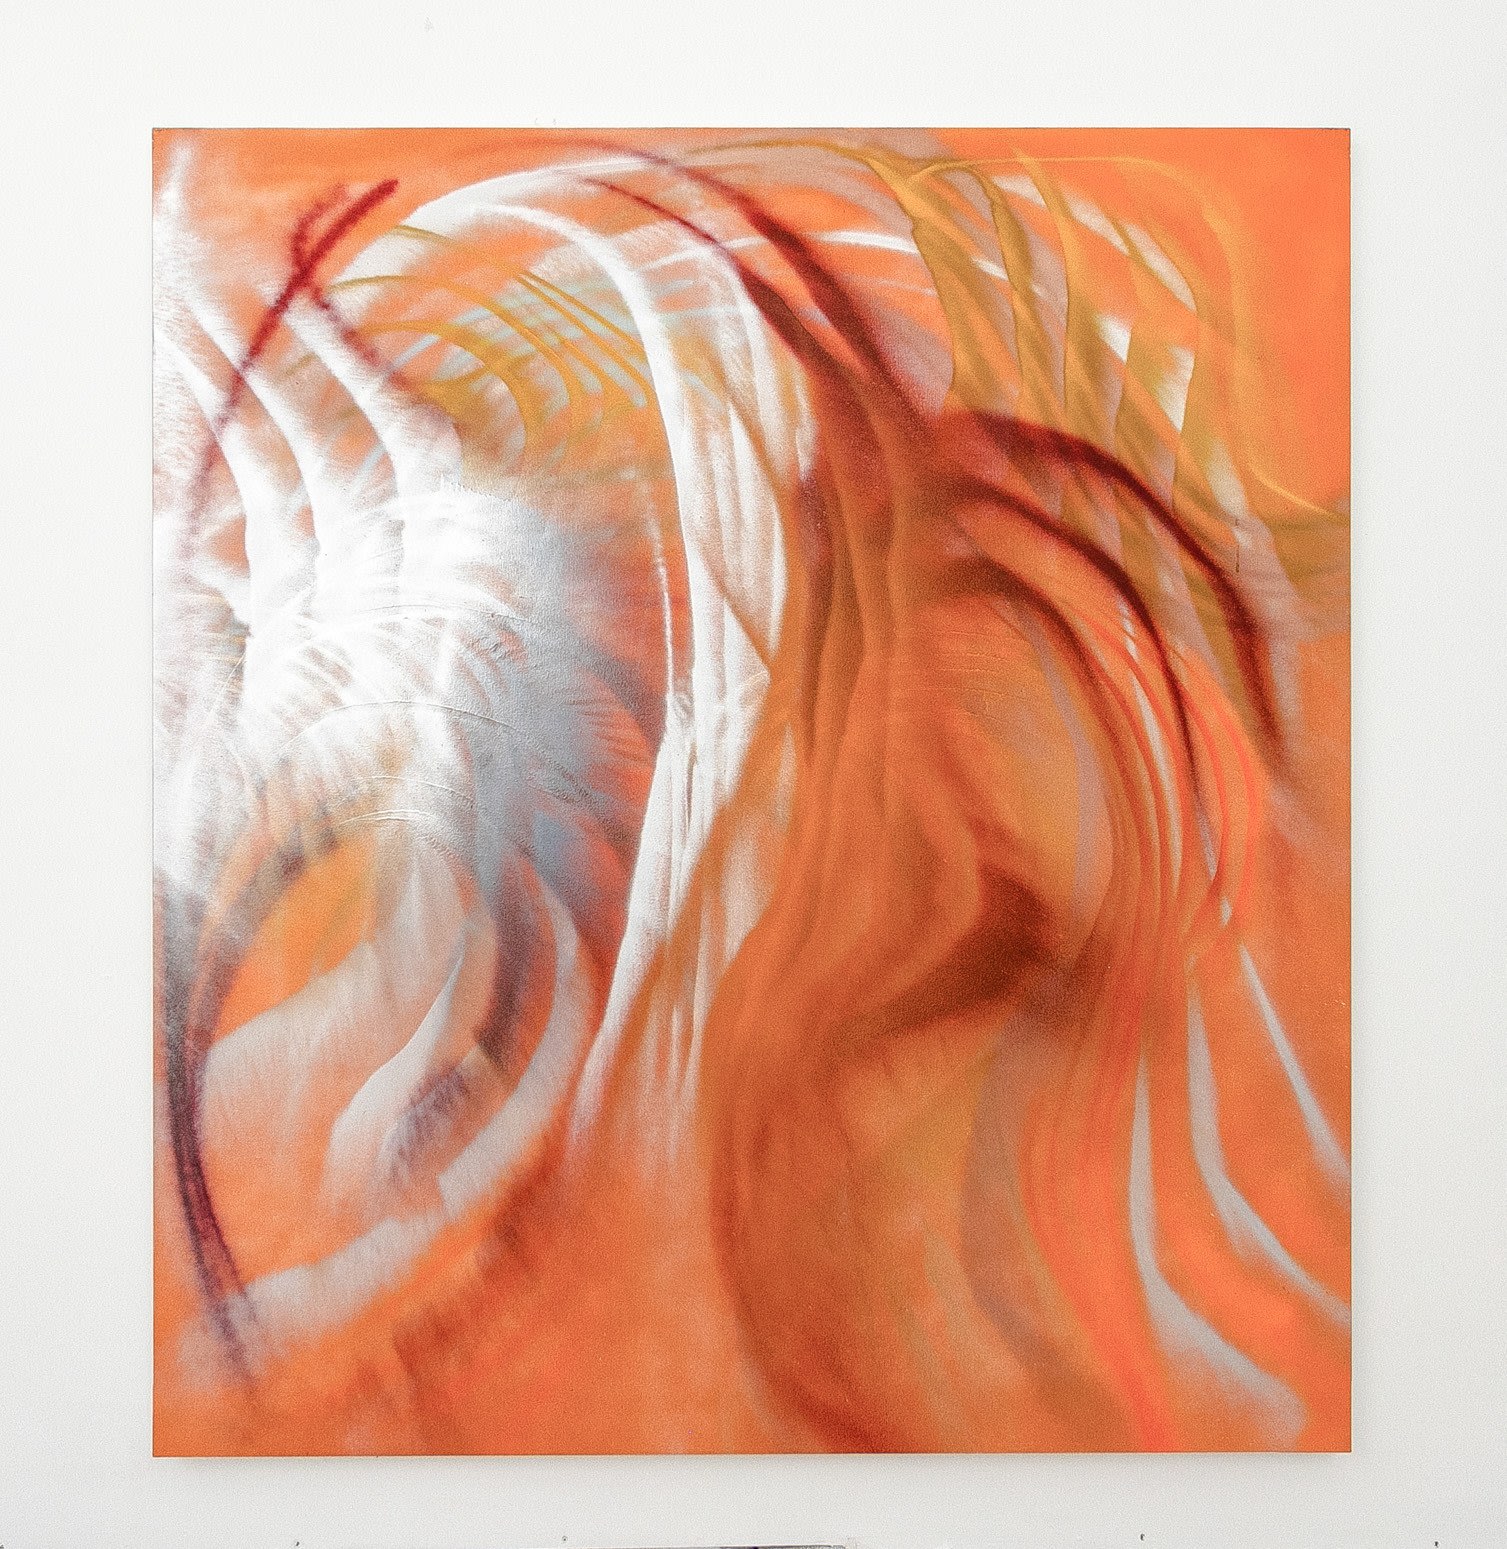 Painting showing a collision of abstract curvy lines in orange and white creating the illusion of the light source coming from the left.